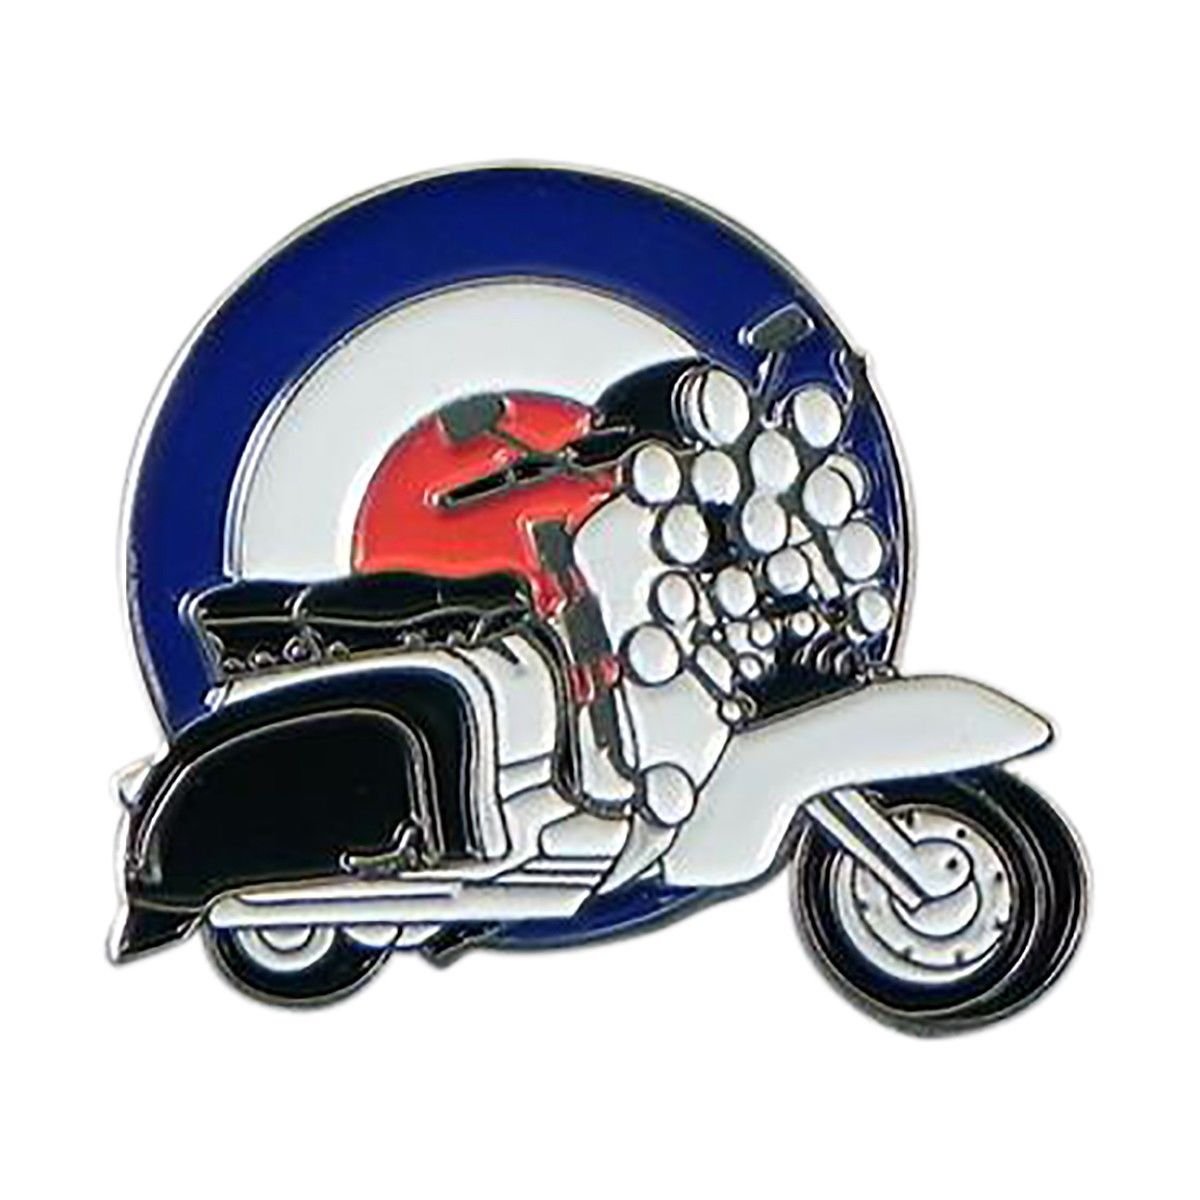 Mods Scooter Pin - Reversnål fra The Prince's Own hos The Prince Webshop